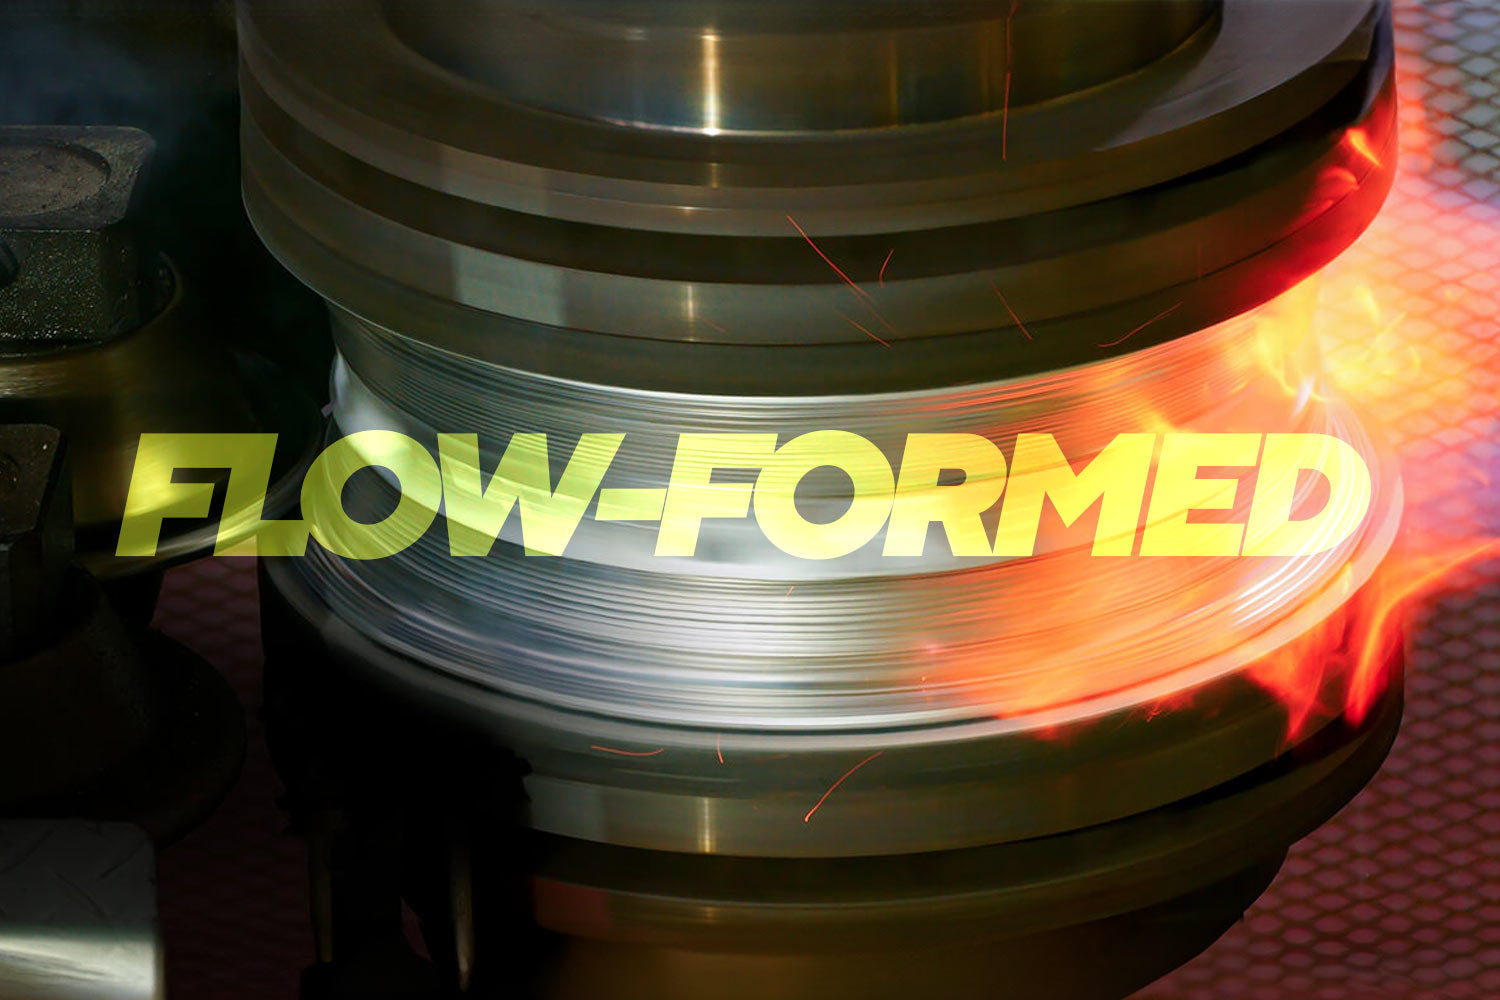 What is a Flow Formed Wheel?